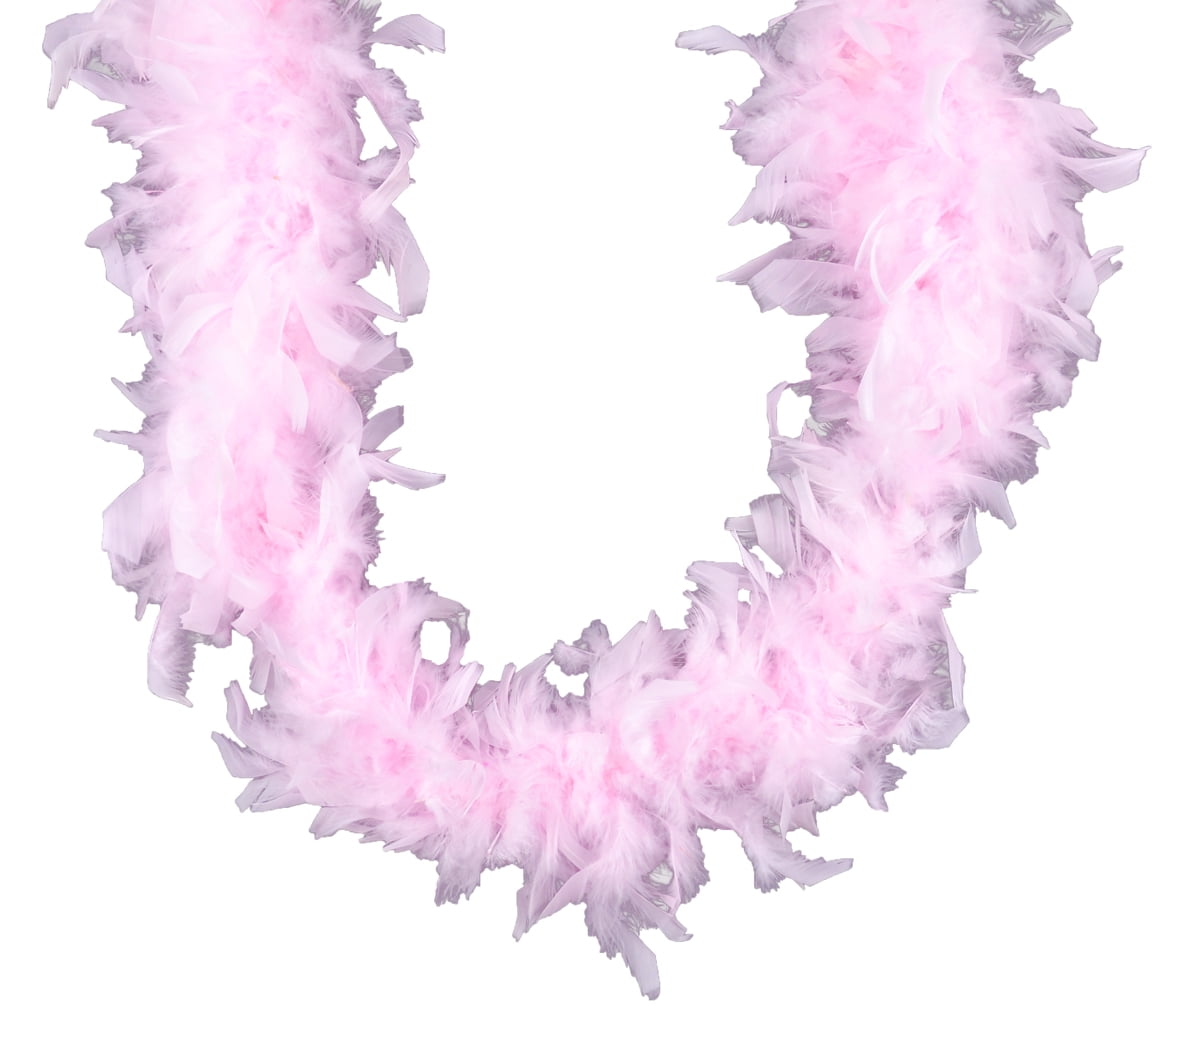 Pack of 3 Light Pink 45gm Boas - Party Boa - Value Pack of Boas